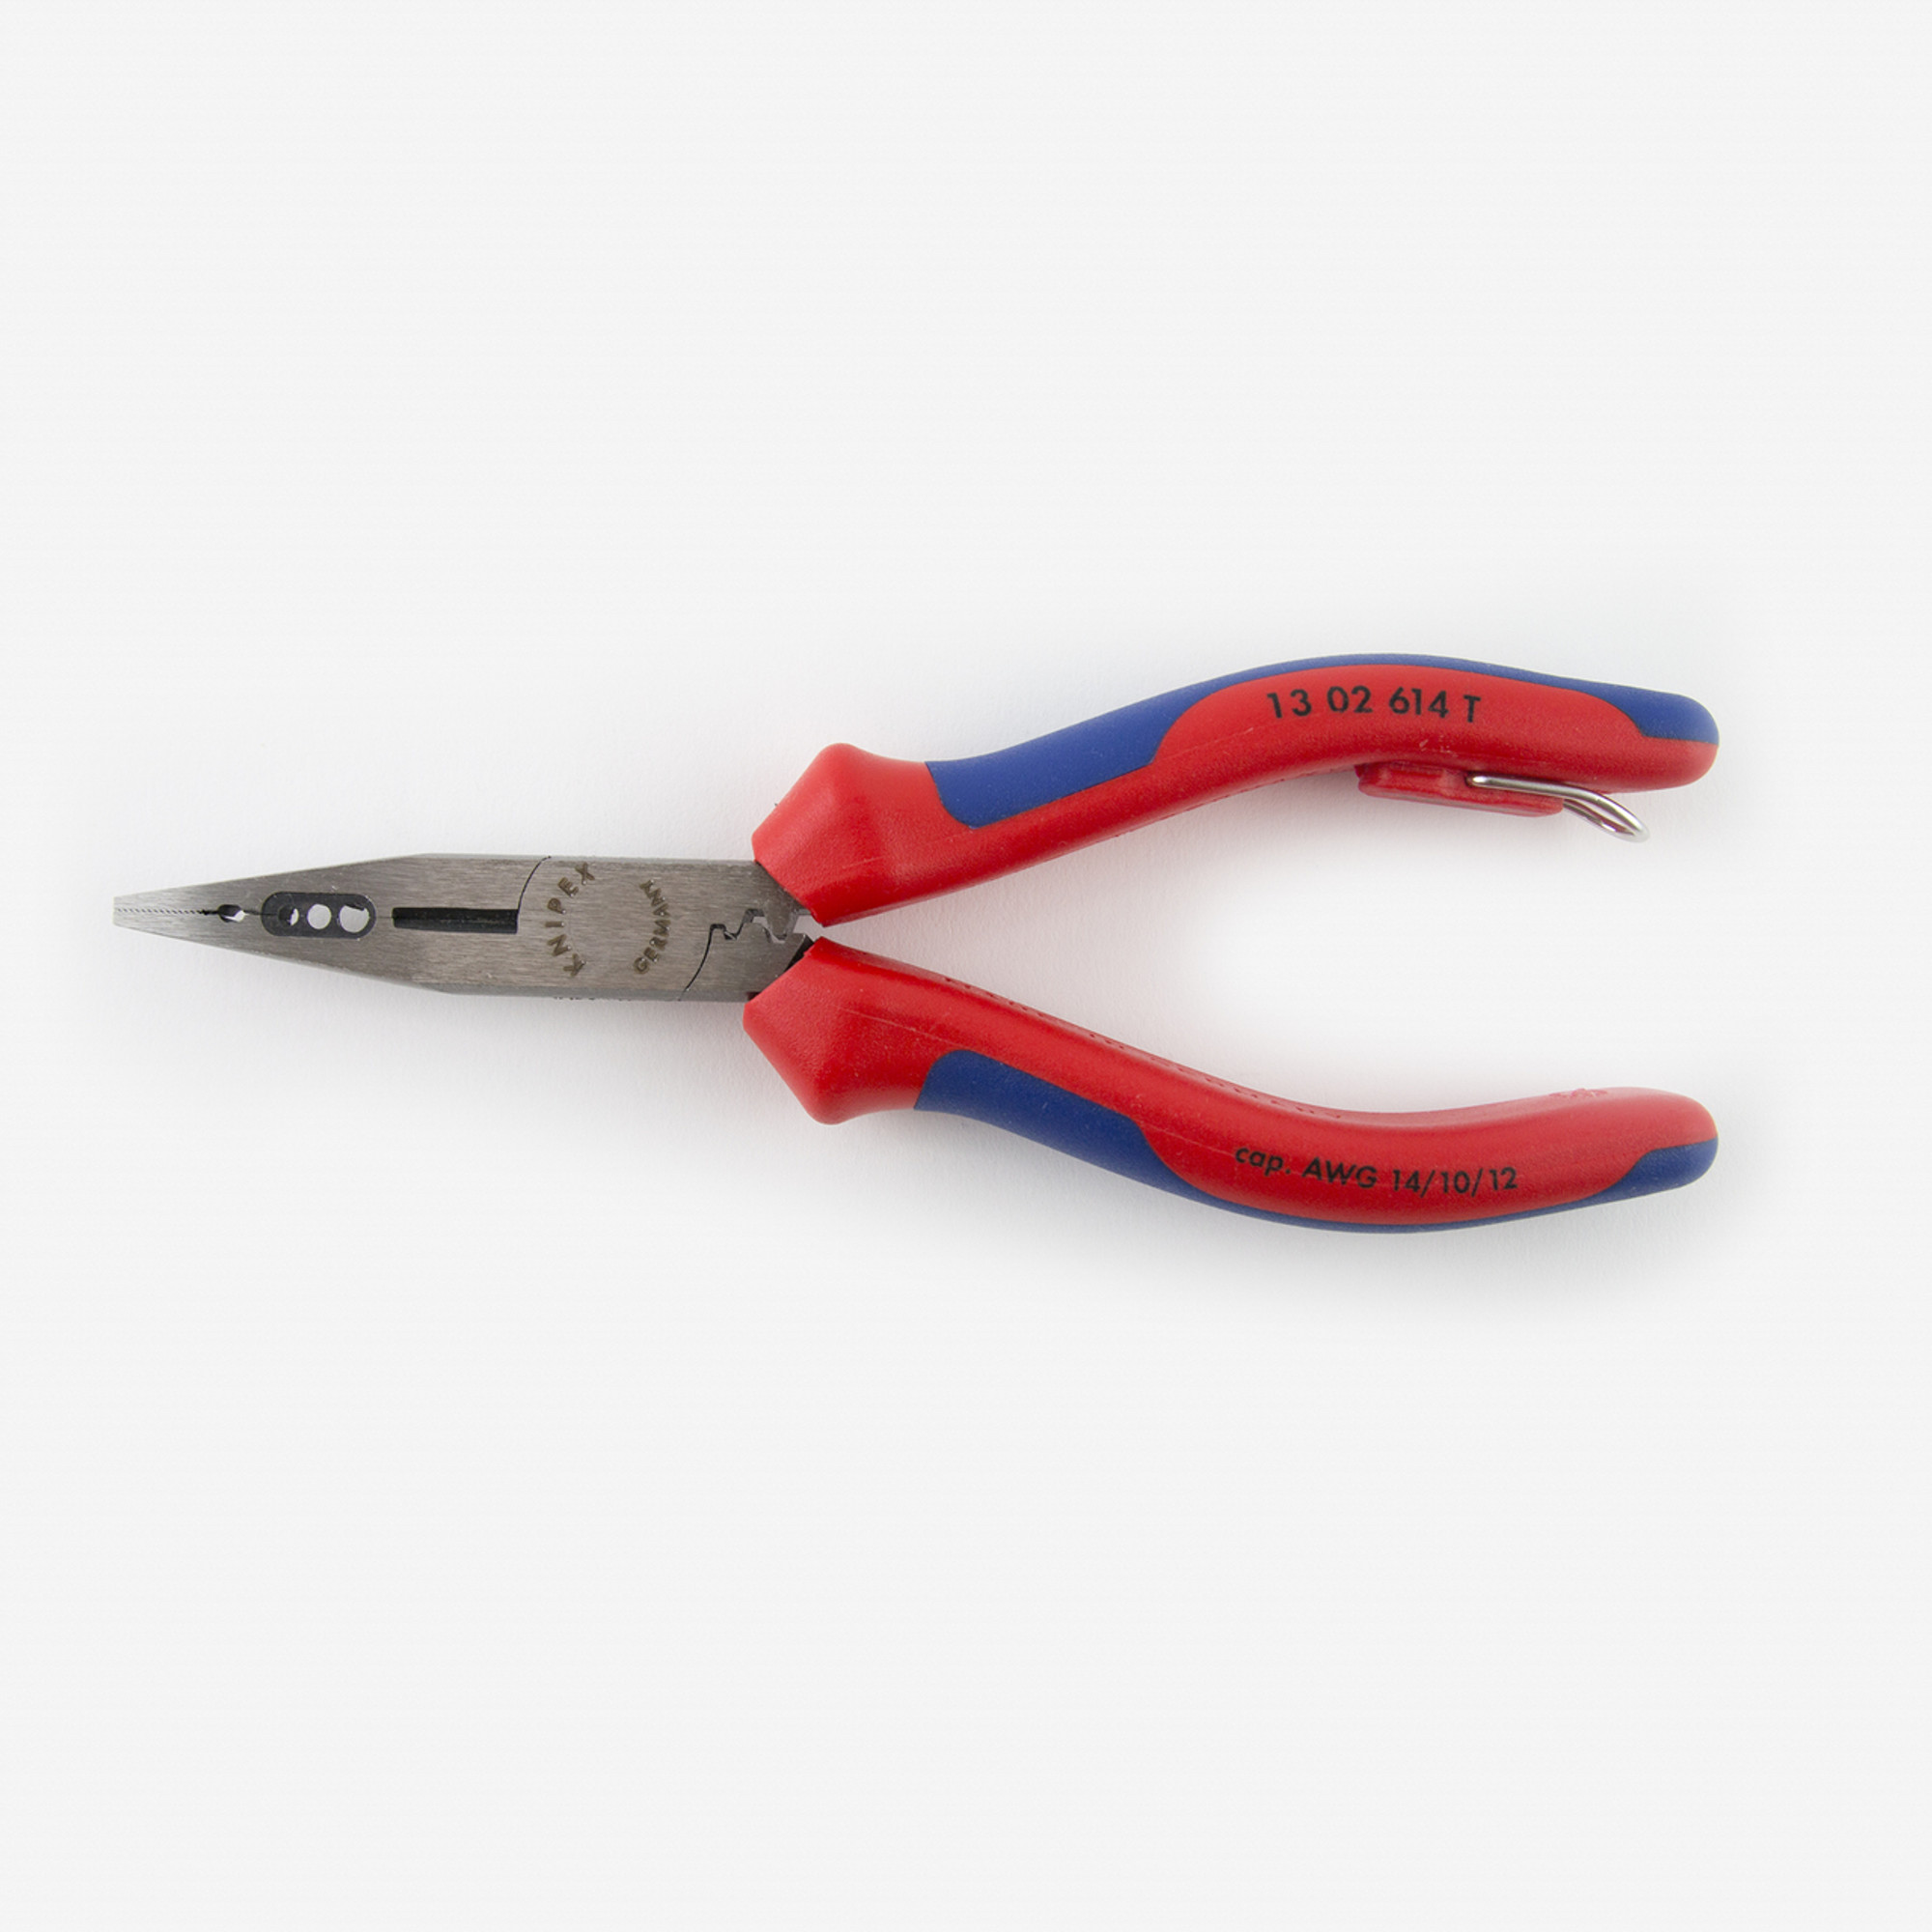 Knipex - Pince multiprise à poignées multiples 160 mm (6.1 / 4in)